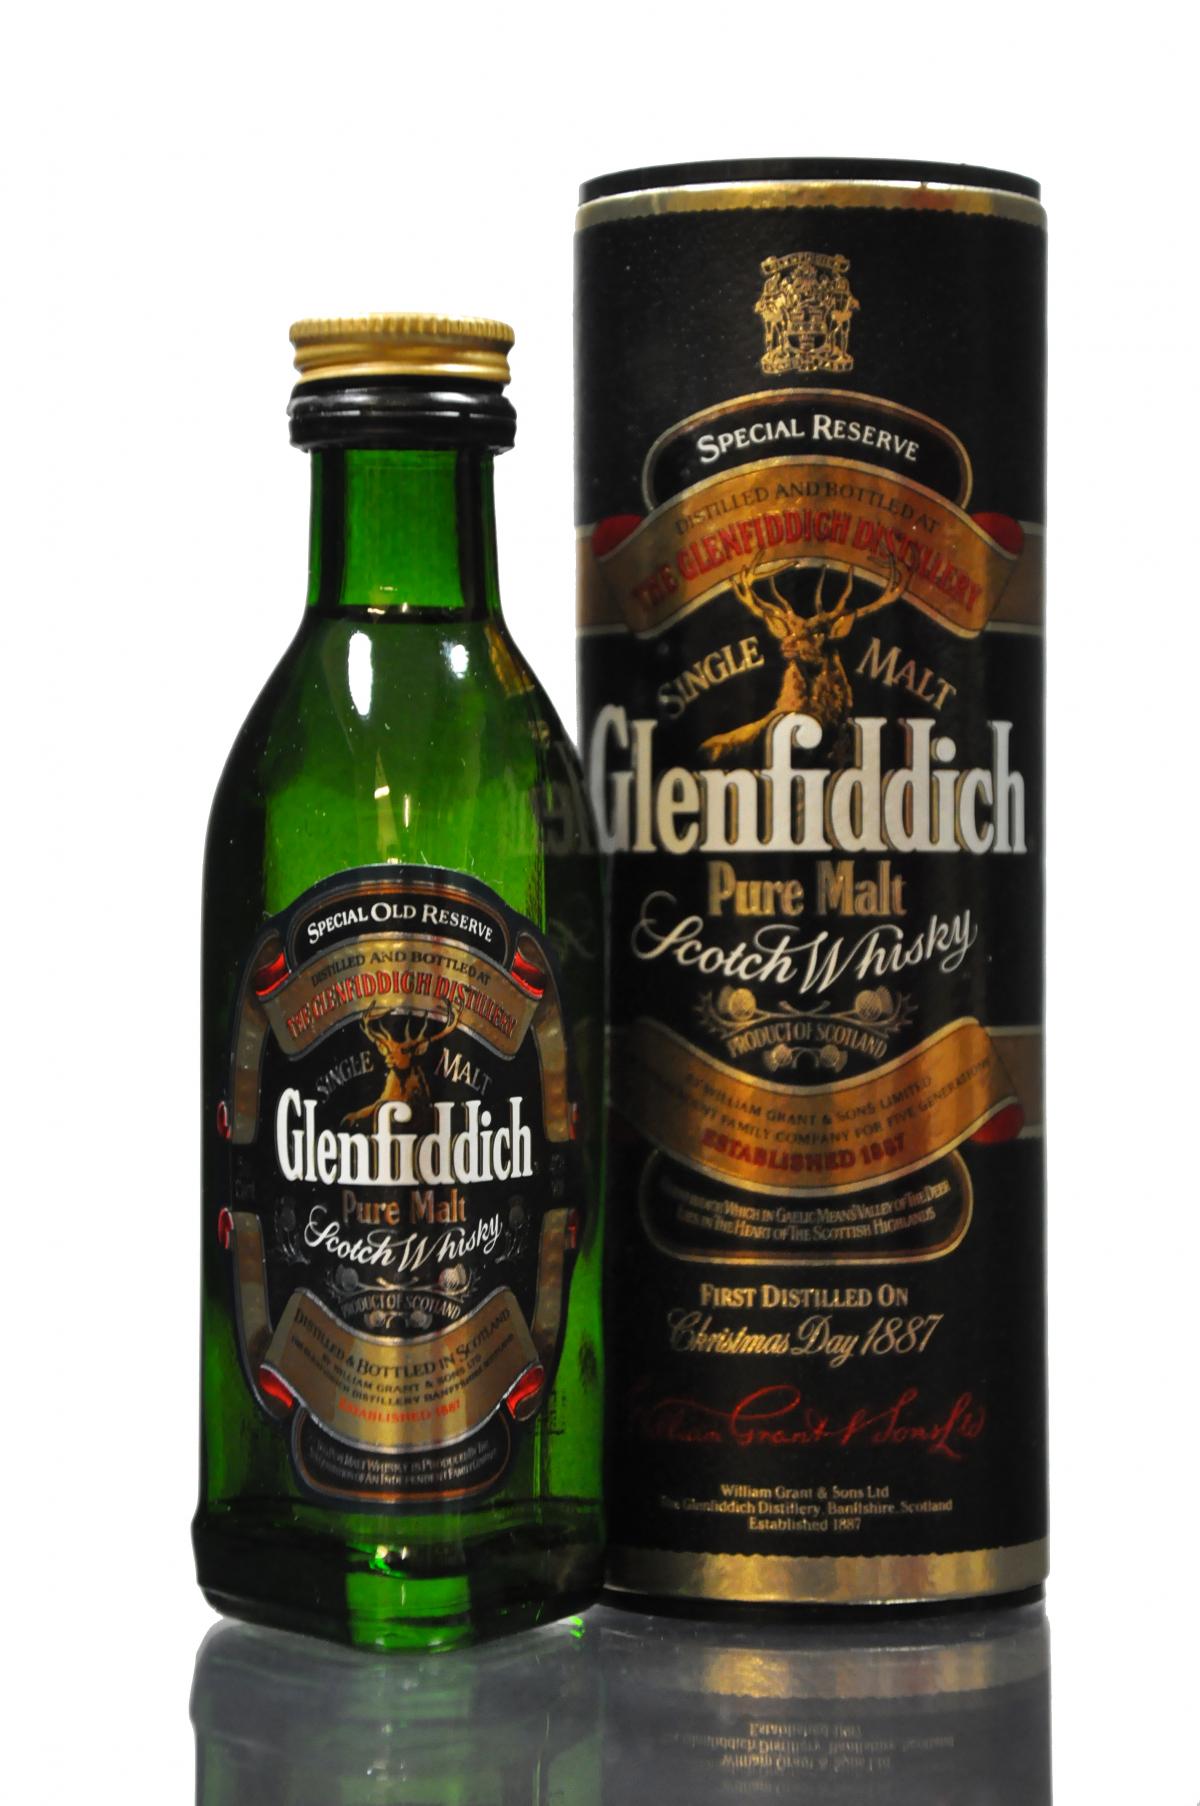 Glenfiddich Special Old Reserve Miniature